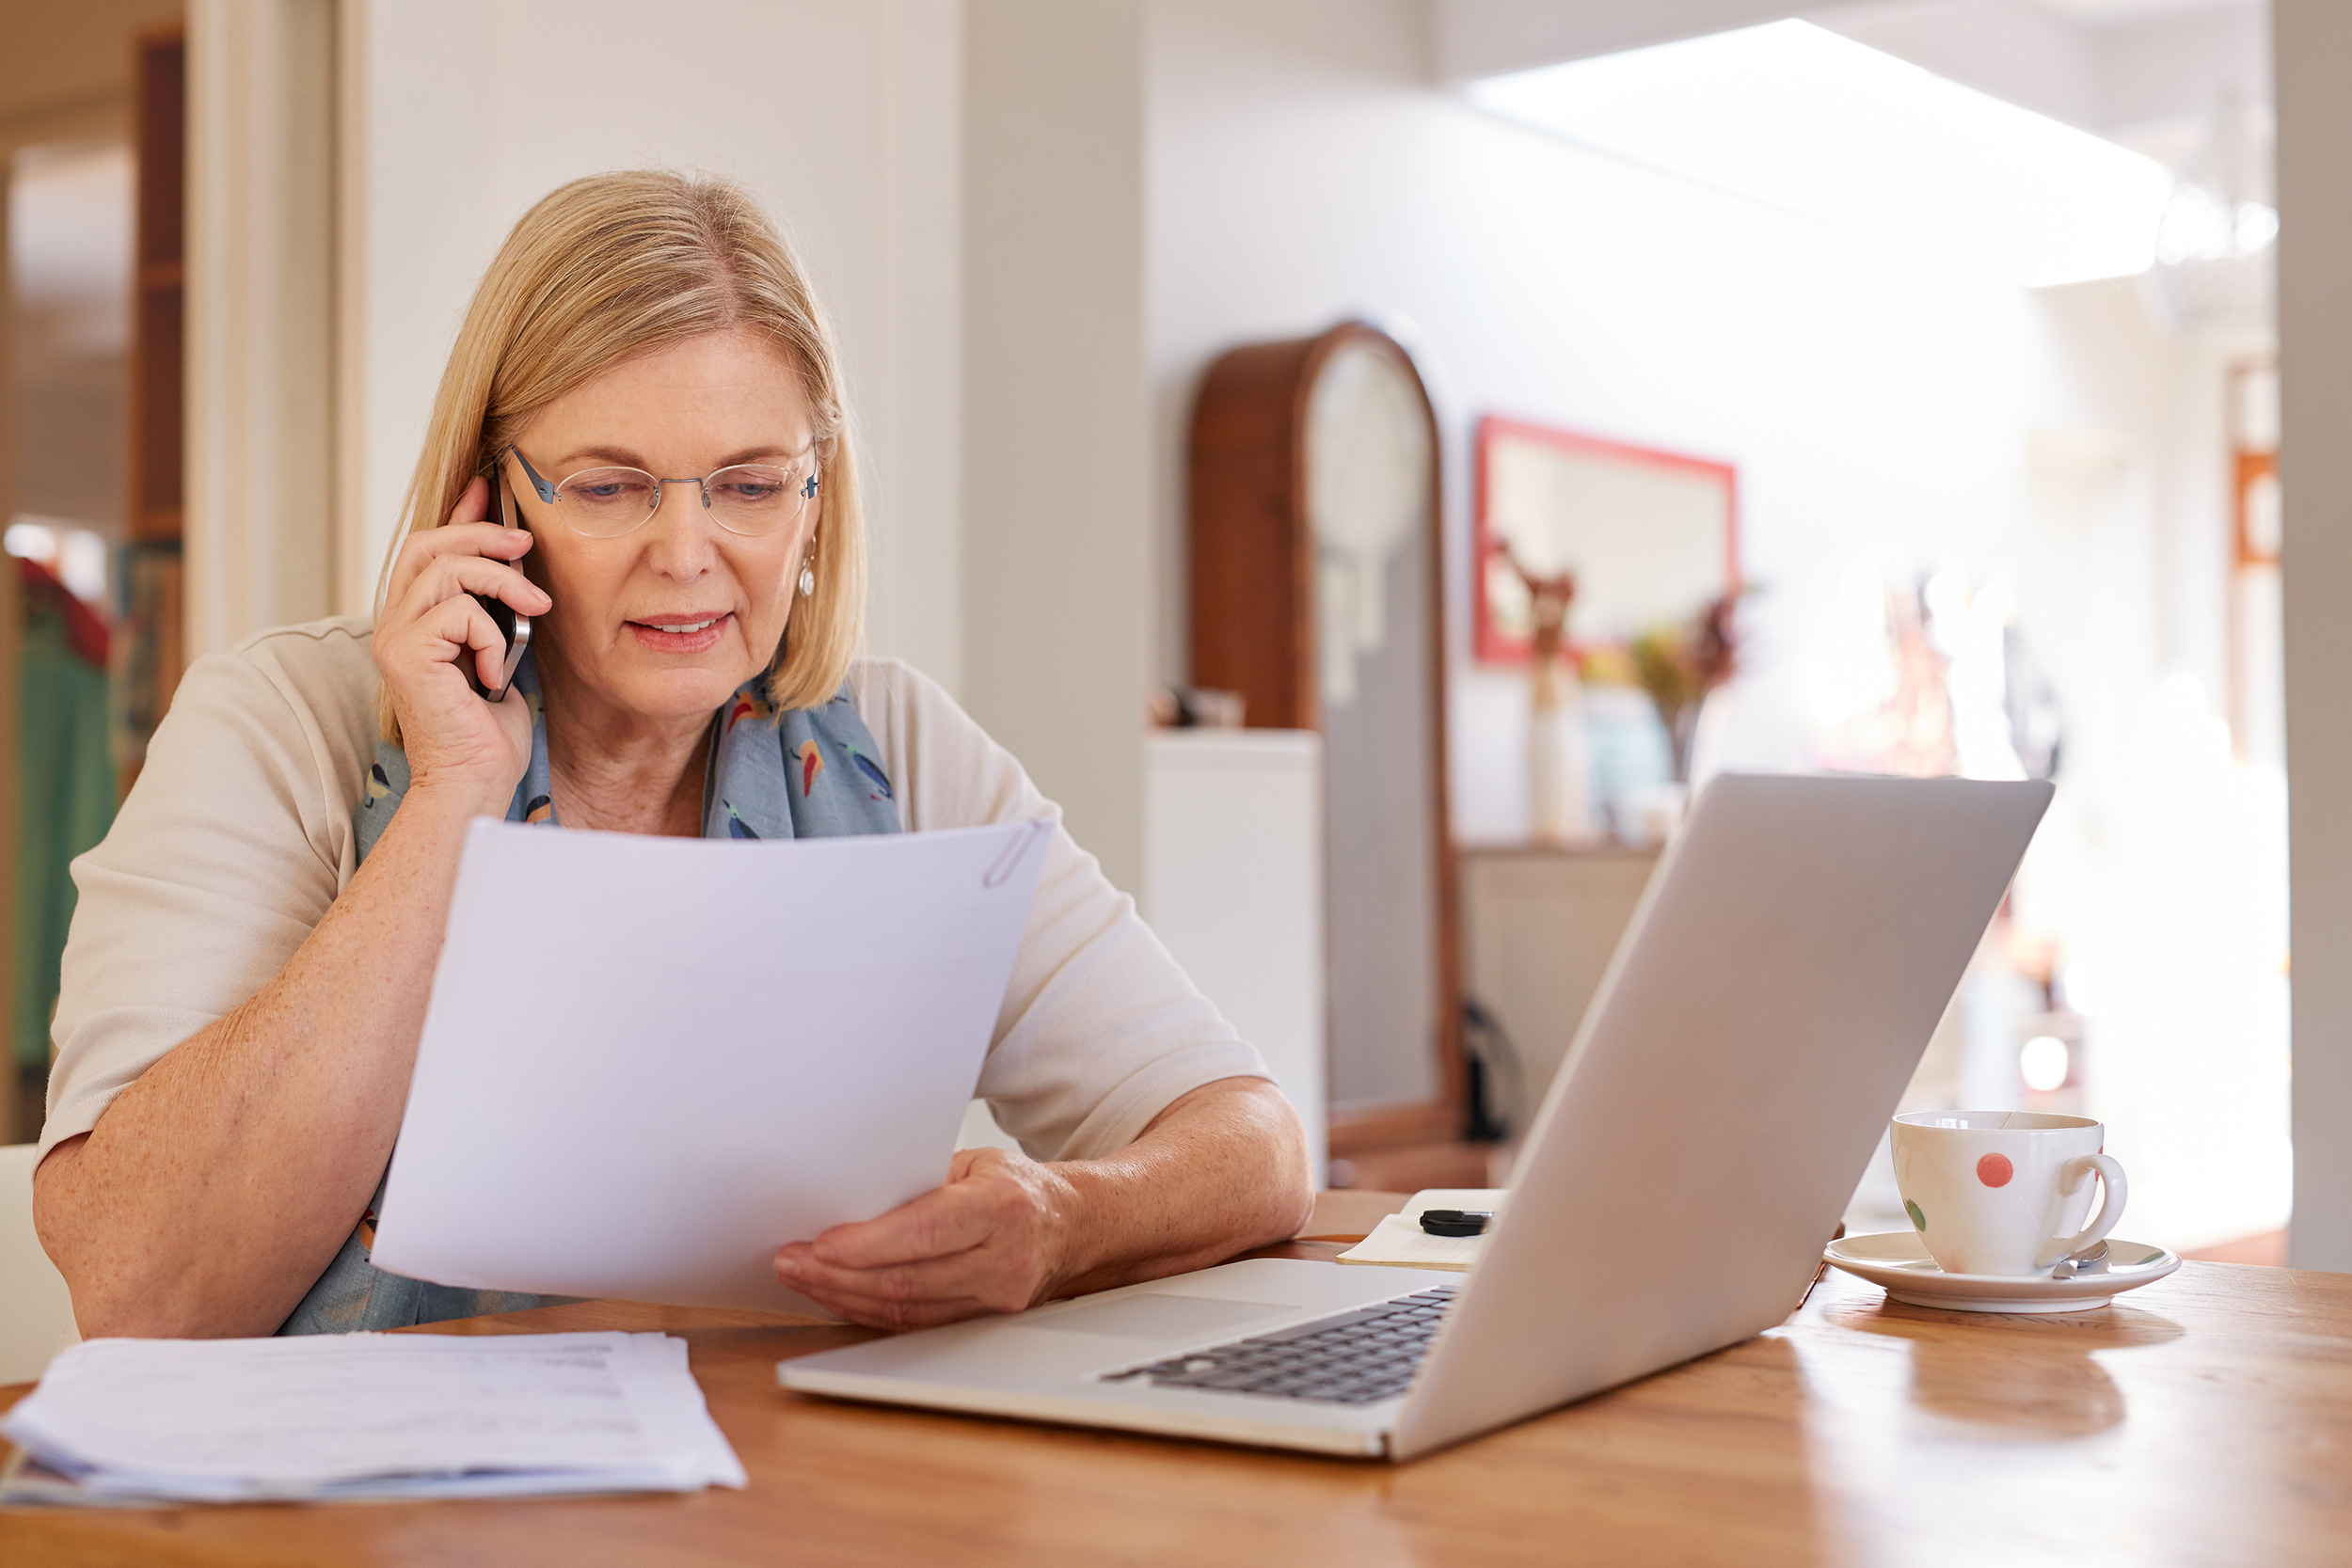 Laptop open and papers in hand, a woman sits at her dining room table talking on the phone. Troutman & Troutman disability attorneys know the common reasons why people get denied for Social Security Disability.